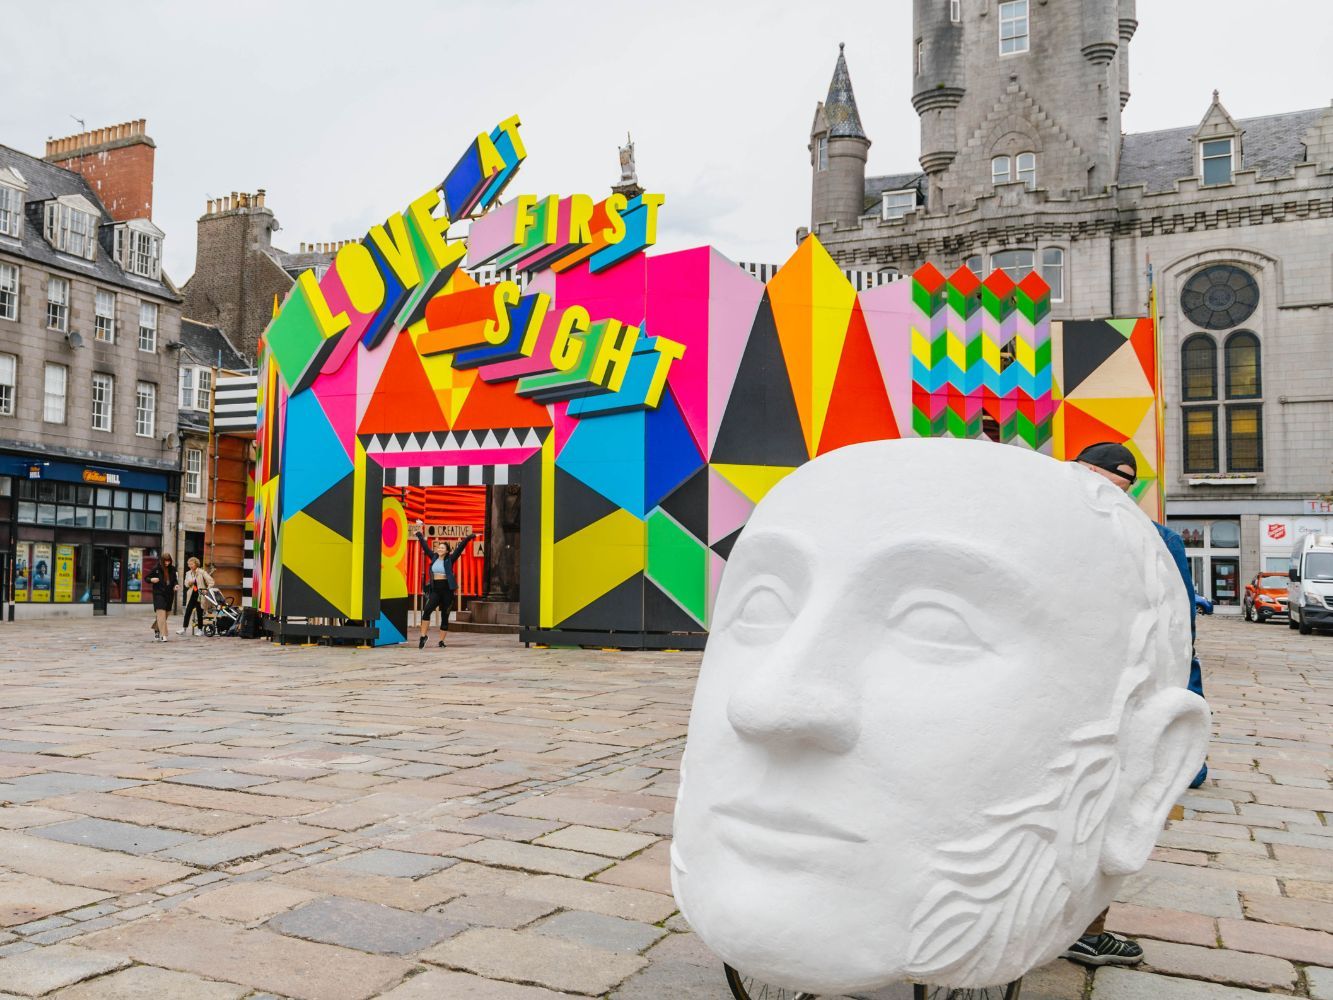 Morag Myerscough Art Installation at Aberdeen's Castlegate including sculpture of man's head in forefront